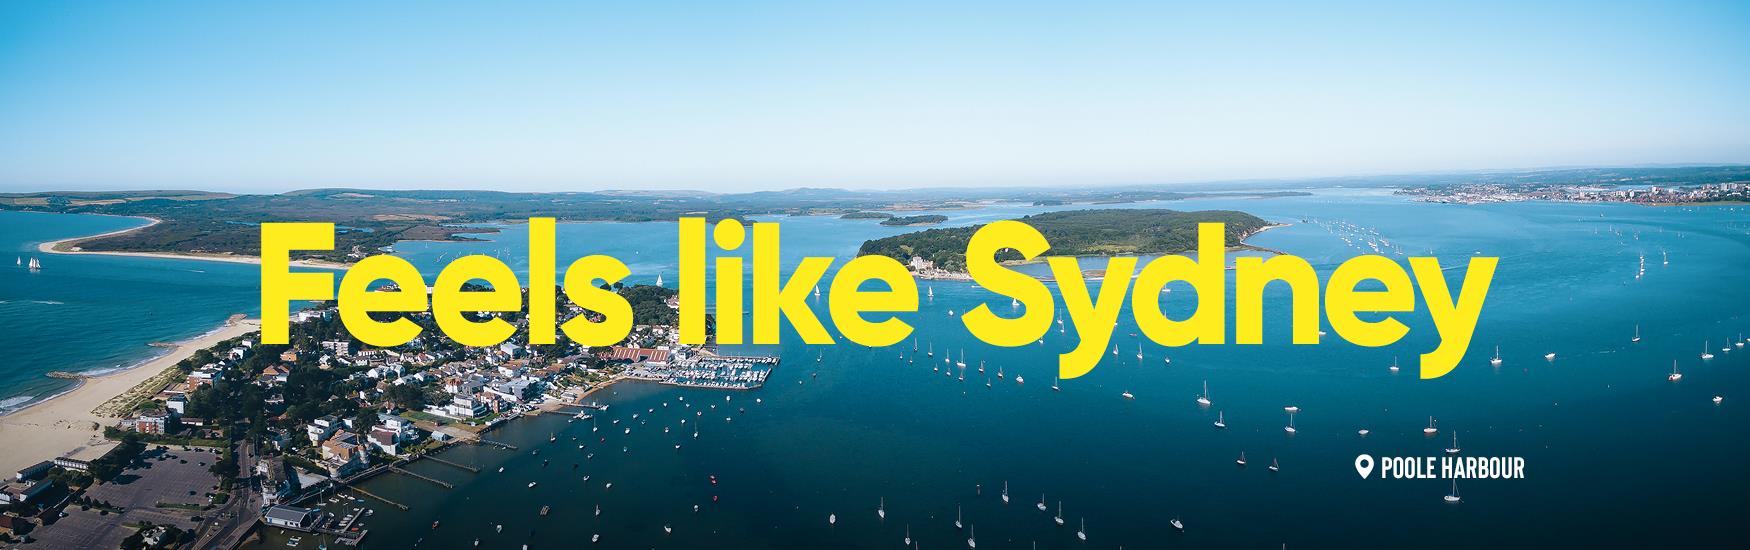 Aerial view of Sandbanks and the surrounding area with feels like sydney text